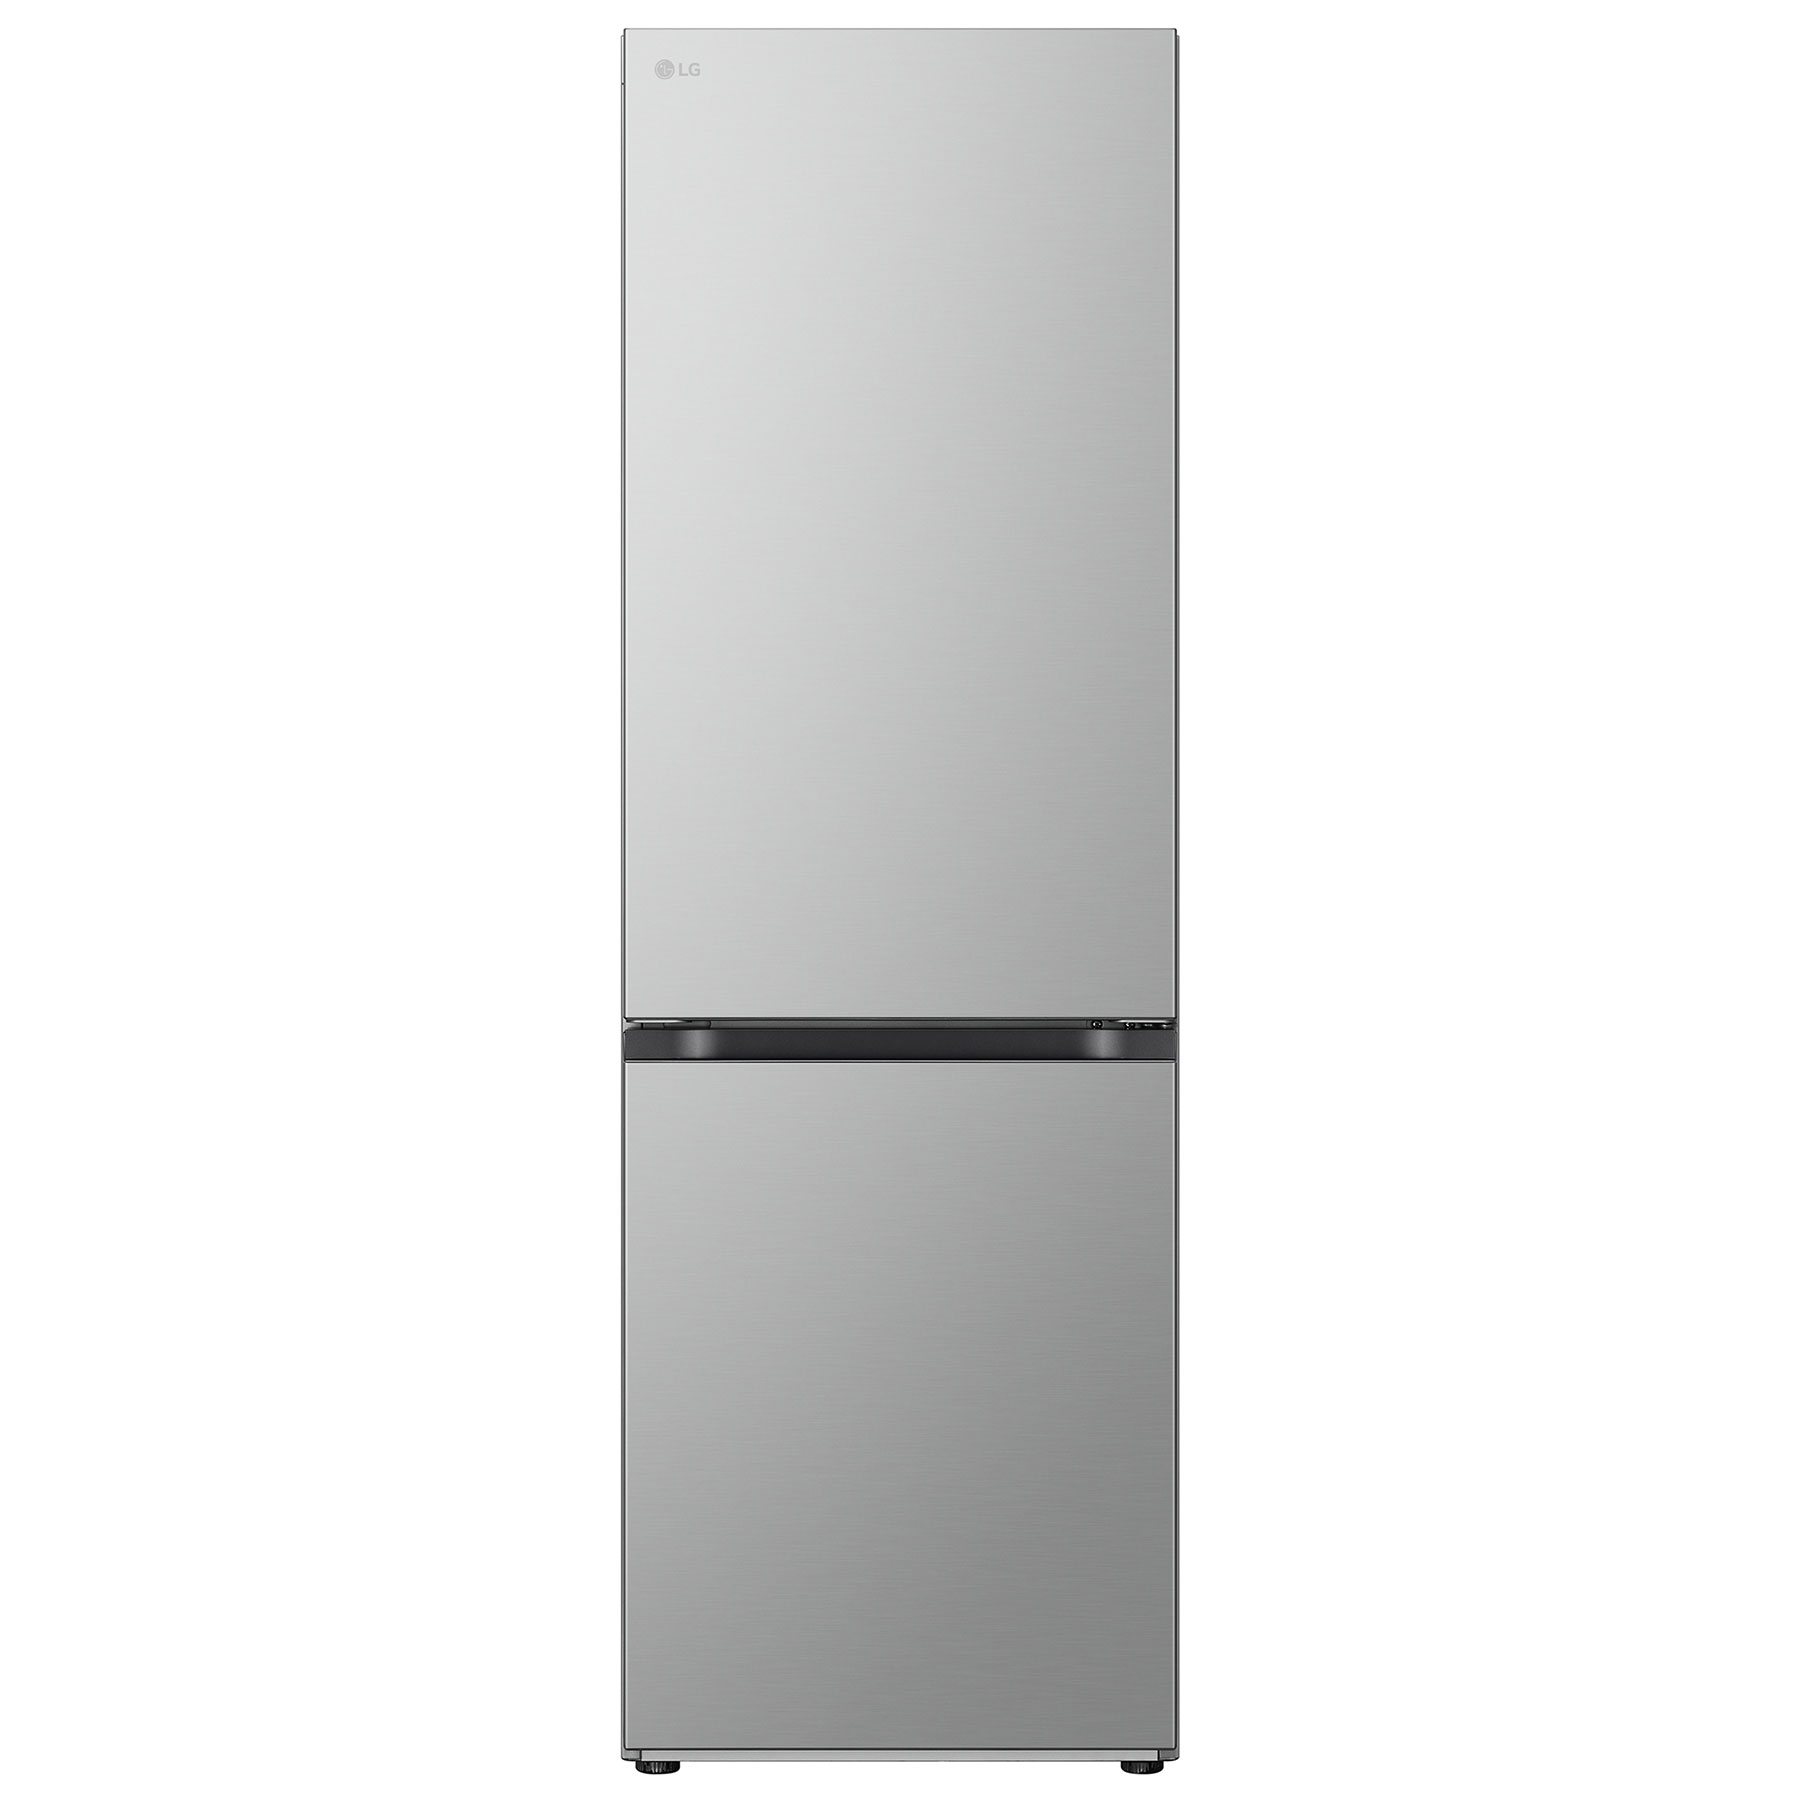 LG GBV3100DPY 60cm Frost Free Fridge Freezer in Silver 1 86m D Rated